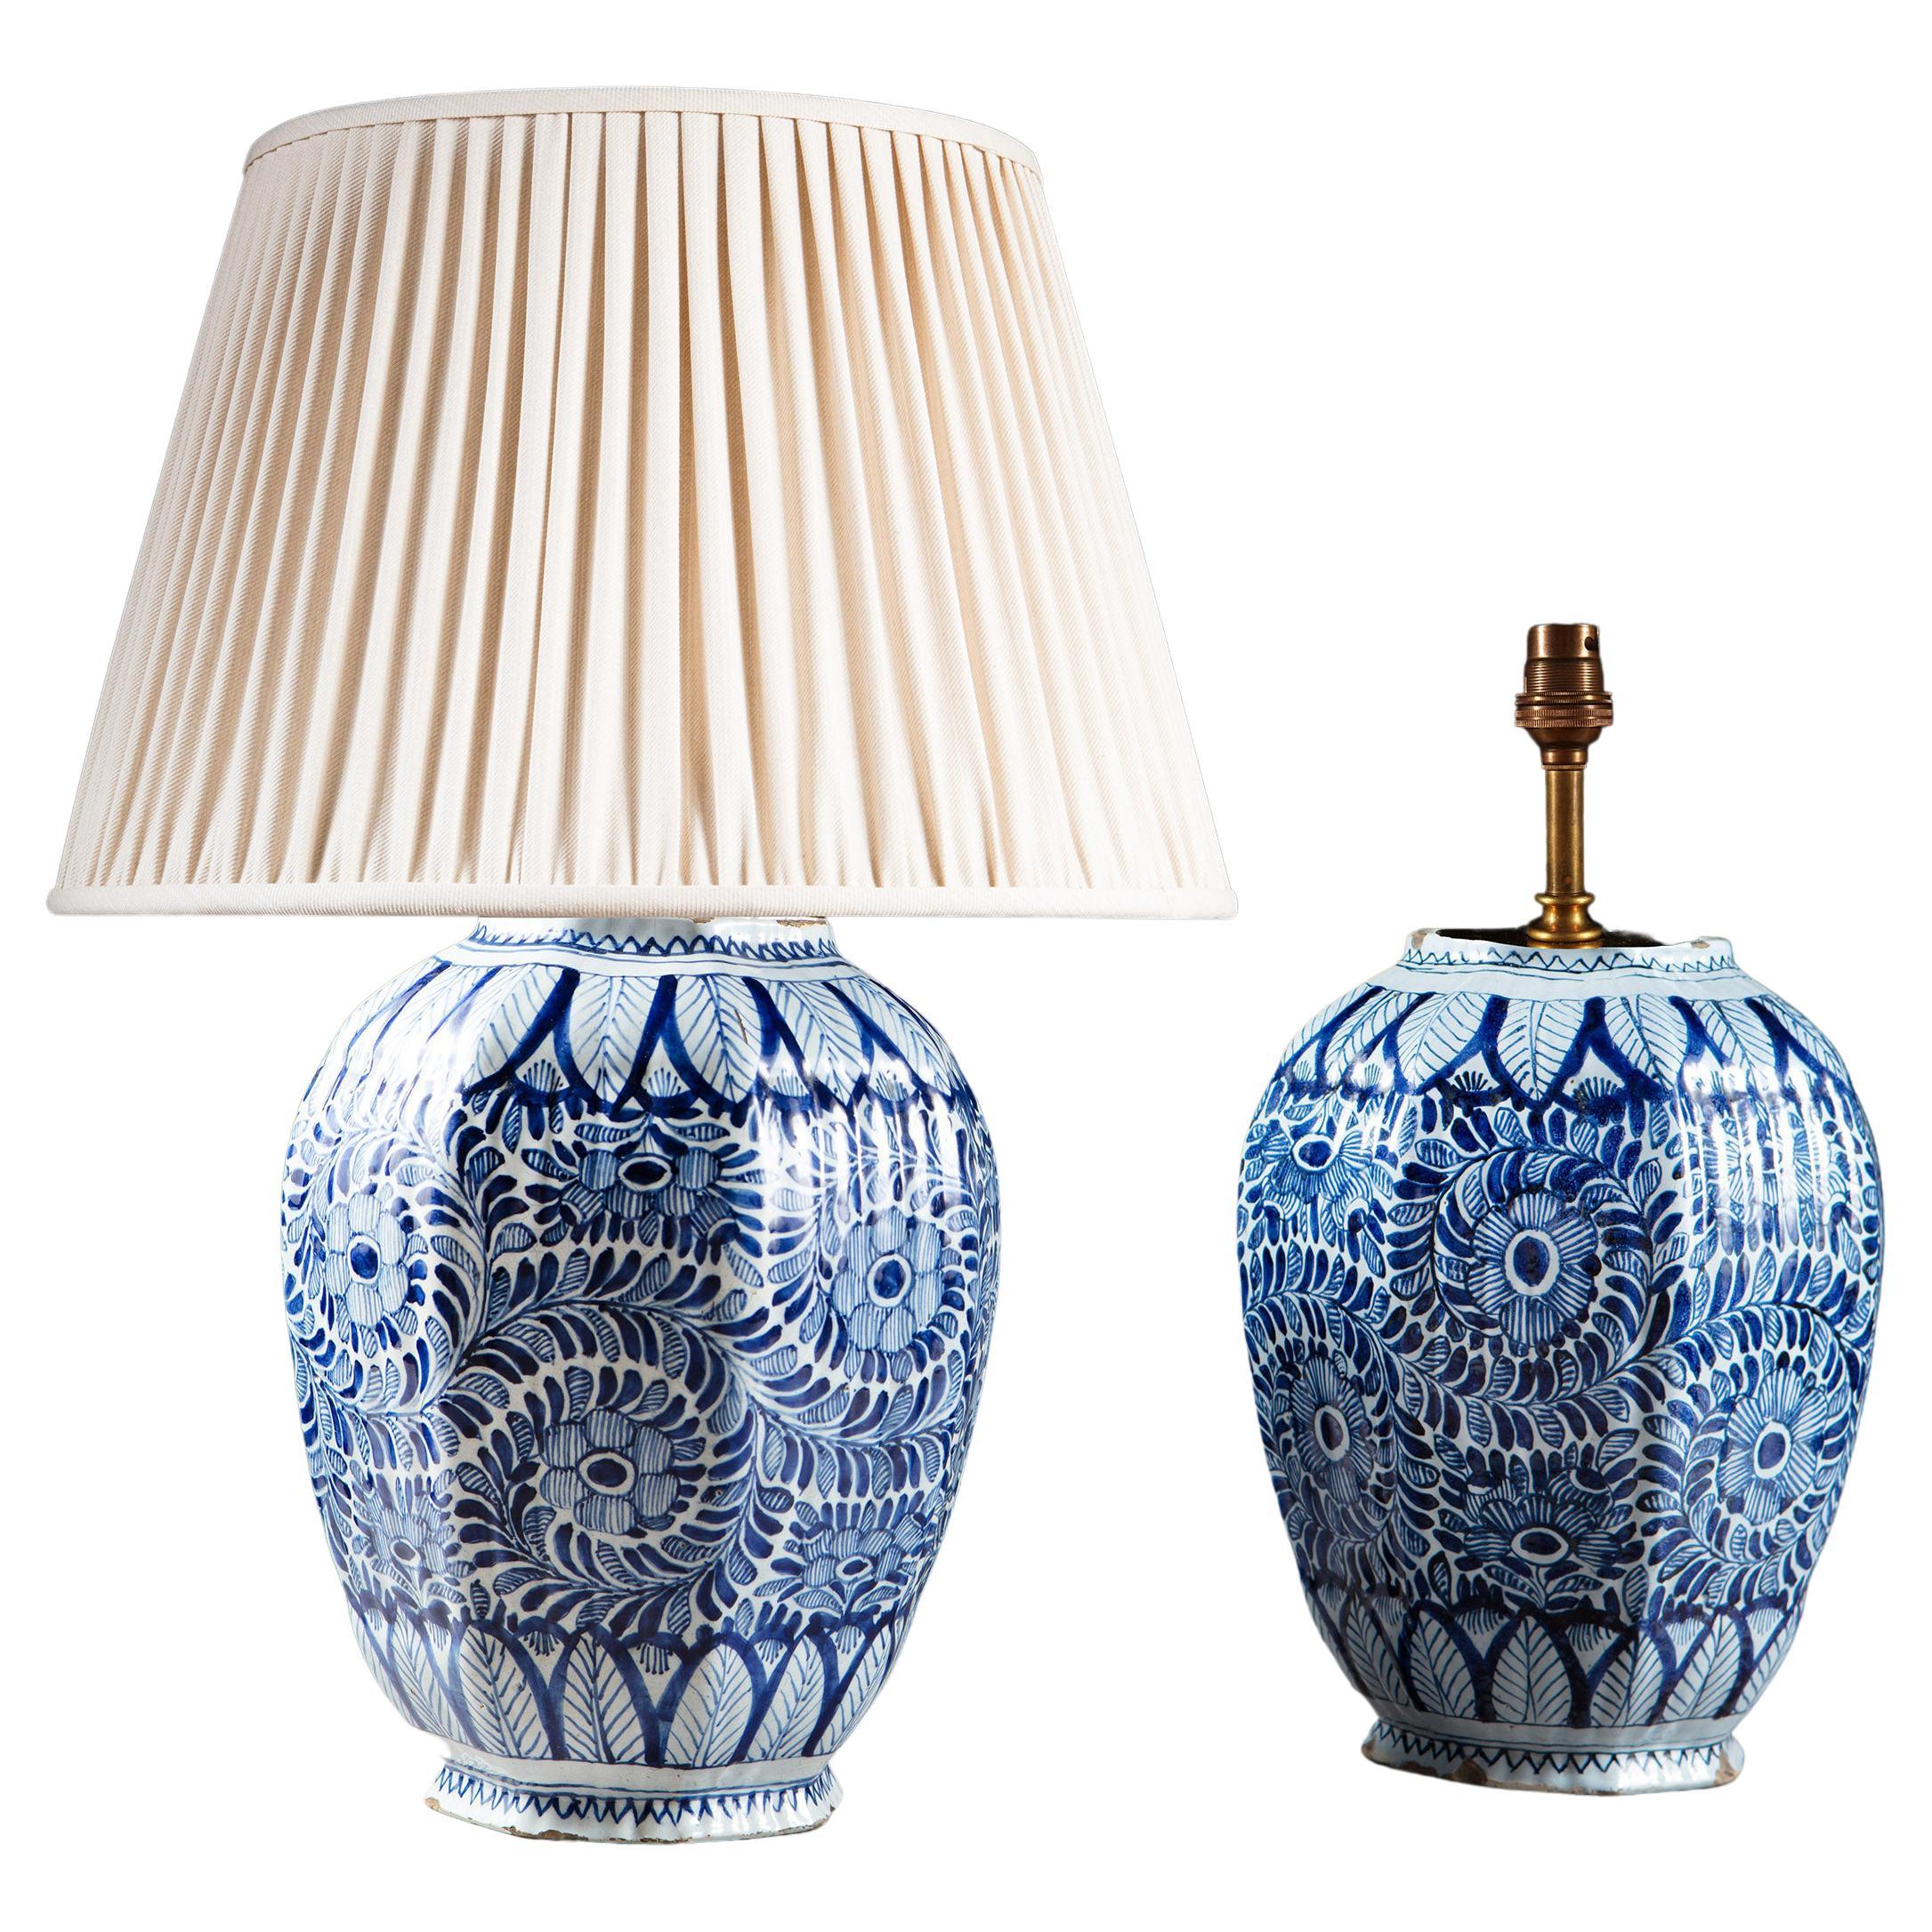 Pair of 19th Century Blue and White Delft Vases Mounted as Lamps